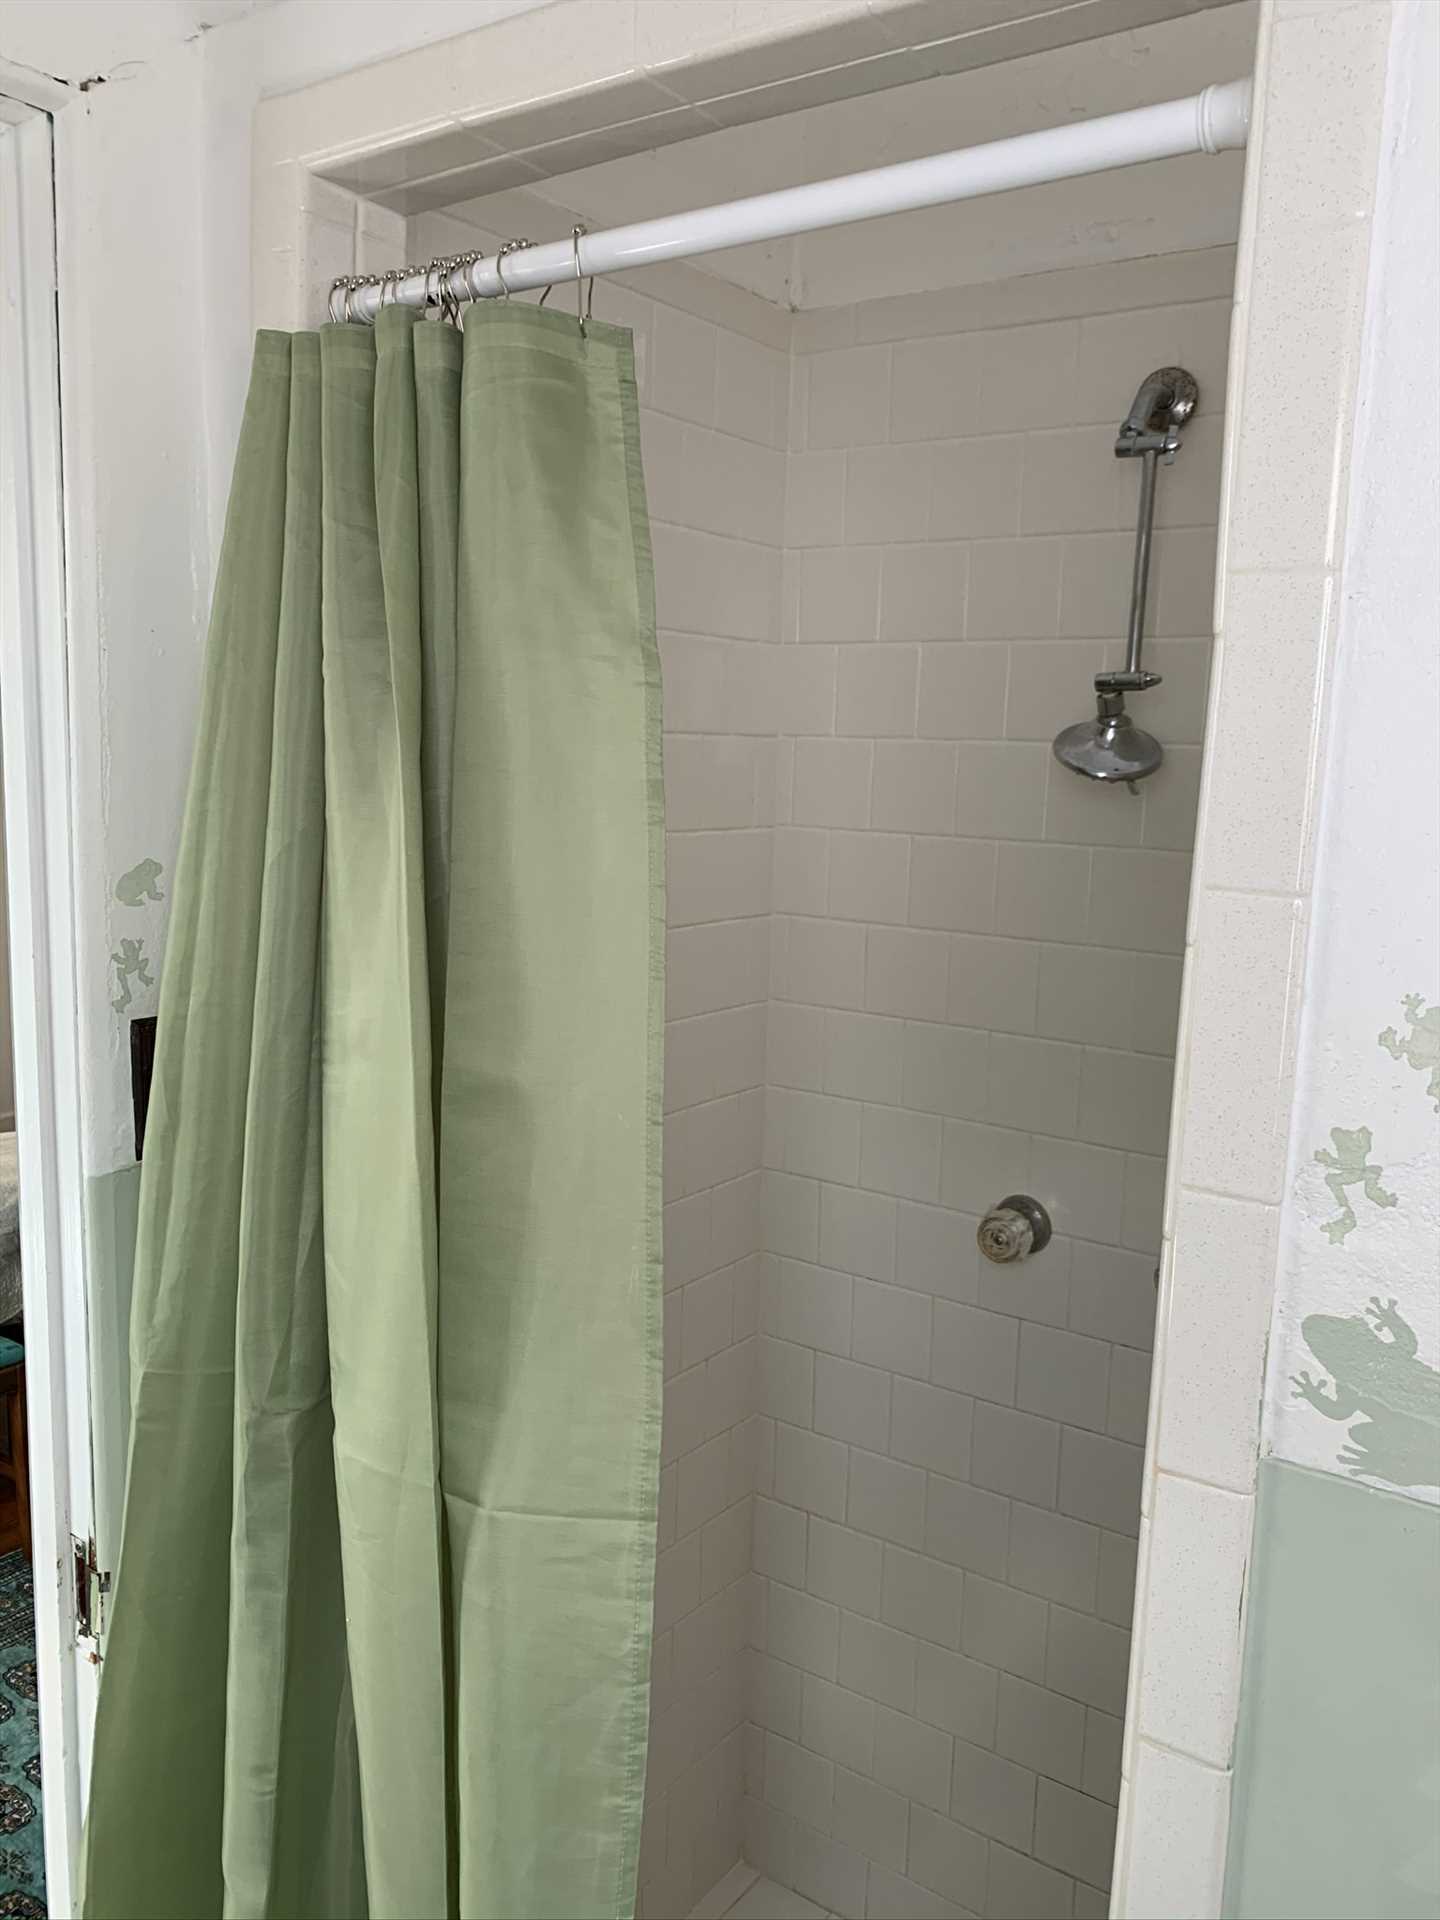                                                 Here's a look at the spotlessly-clean shower in the Jack & Jill bathroom. All the bathroom and bedroom linens your crew will need are provided.